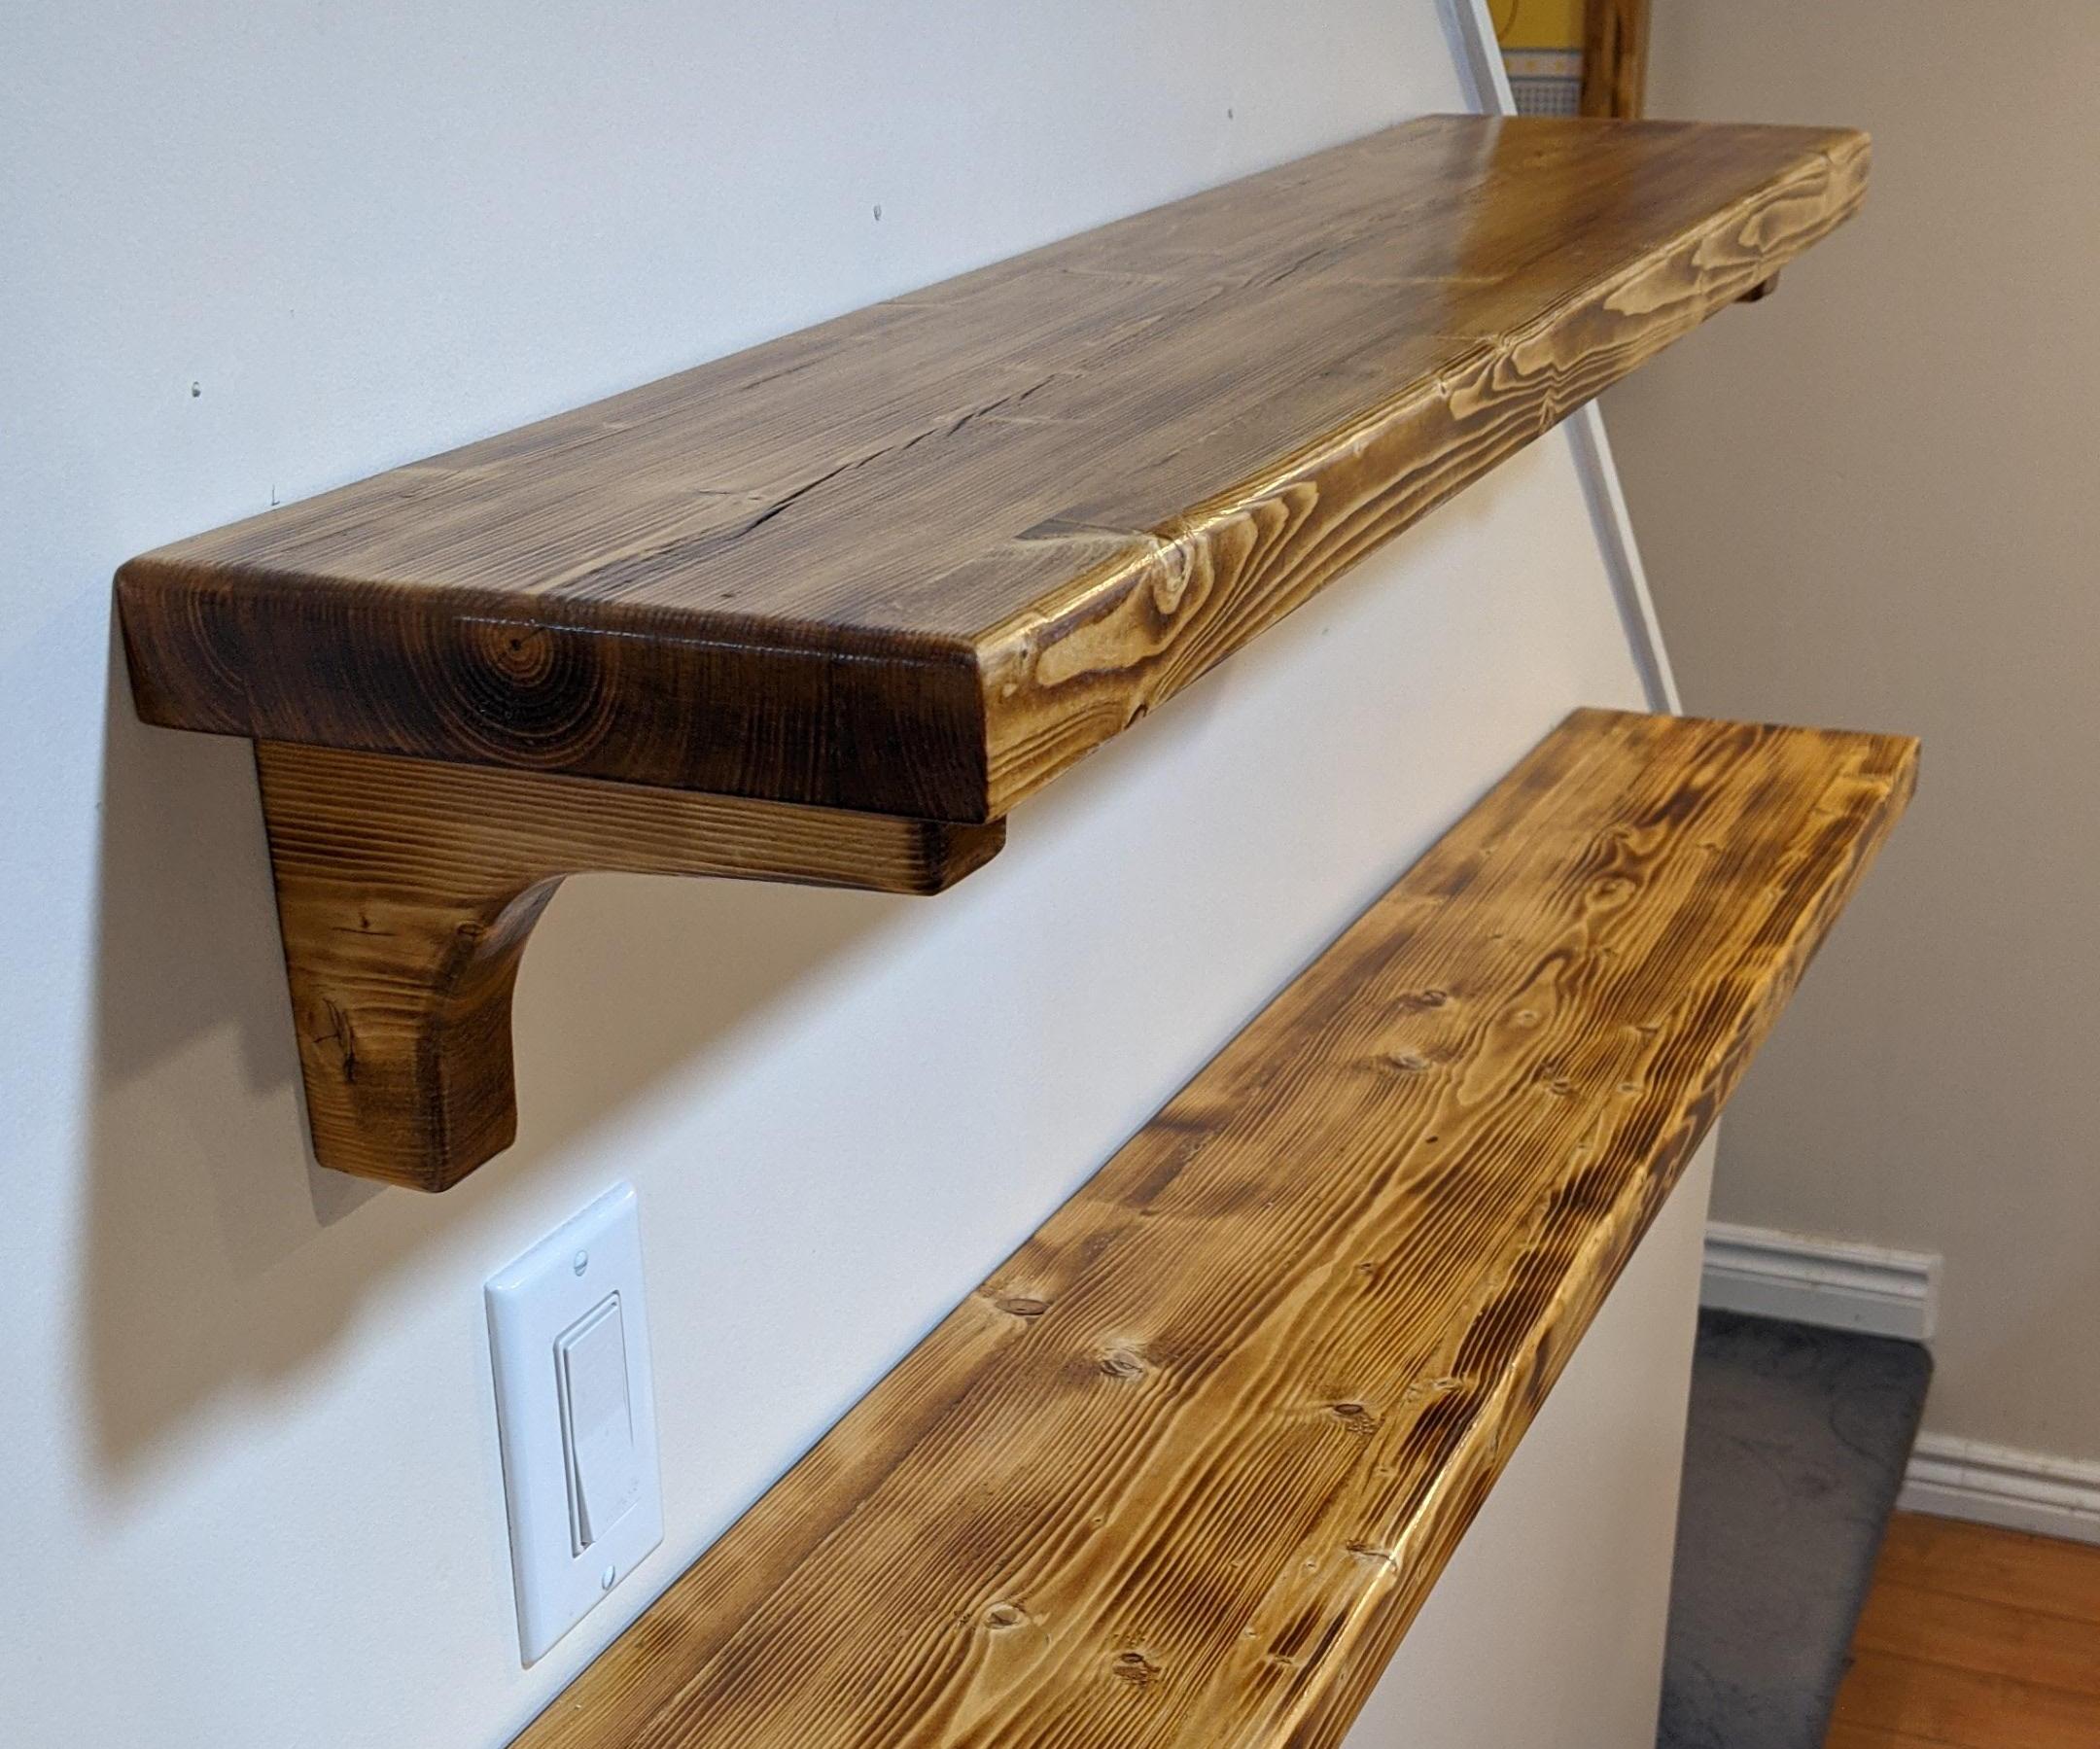 Chunky Shelves Out of a Single 2x6